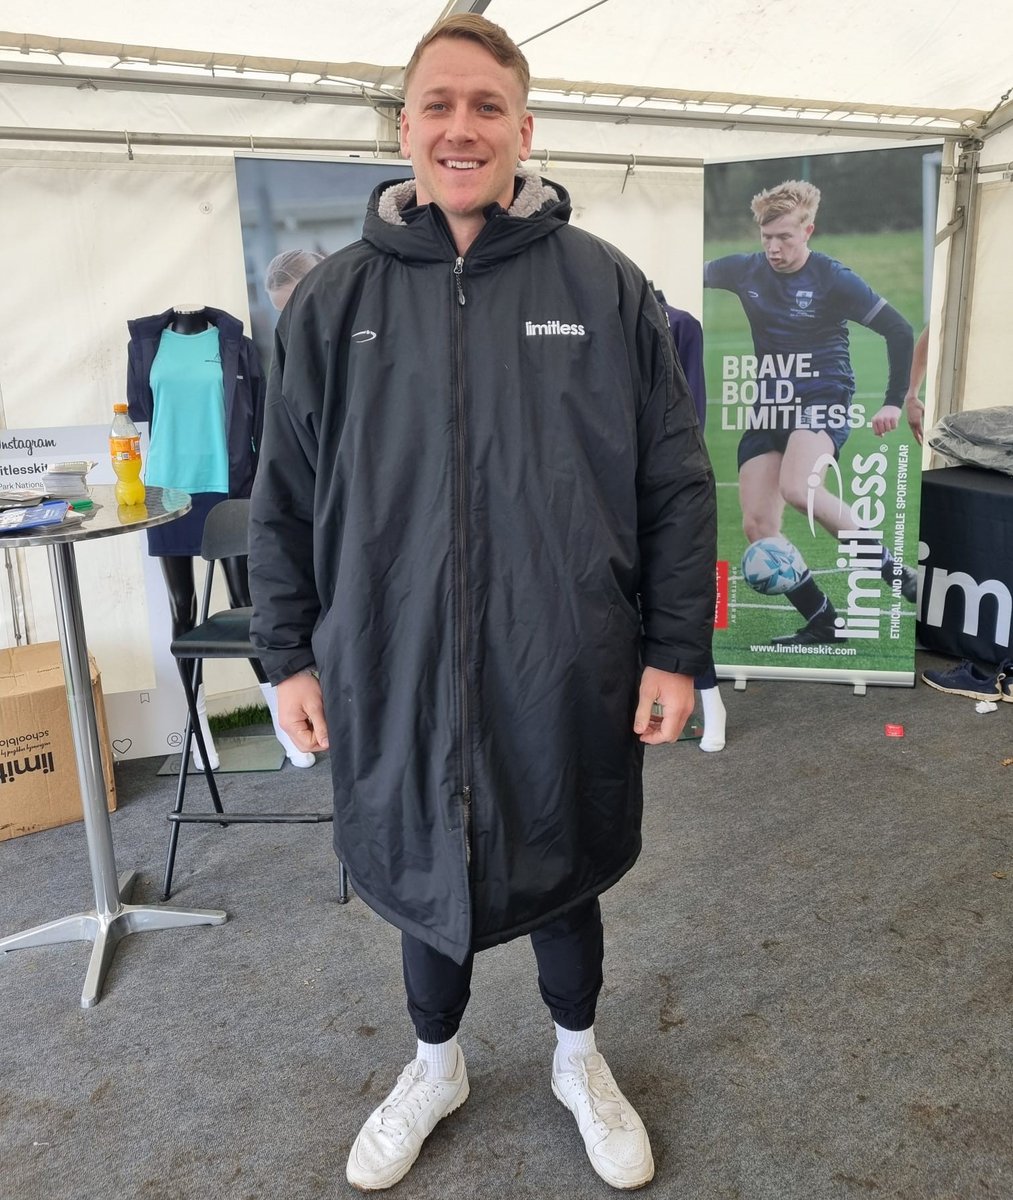 Excited to have current England Rugby player Alex Dombrandt with us in the Limitless tent @rpns7s this afternoon! @NextGenXV #braveboldlimitless